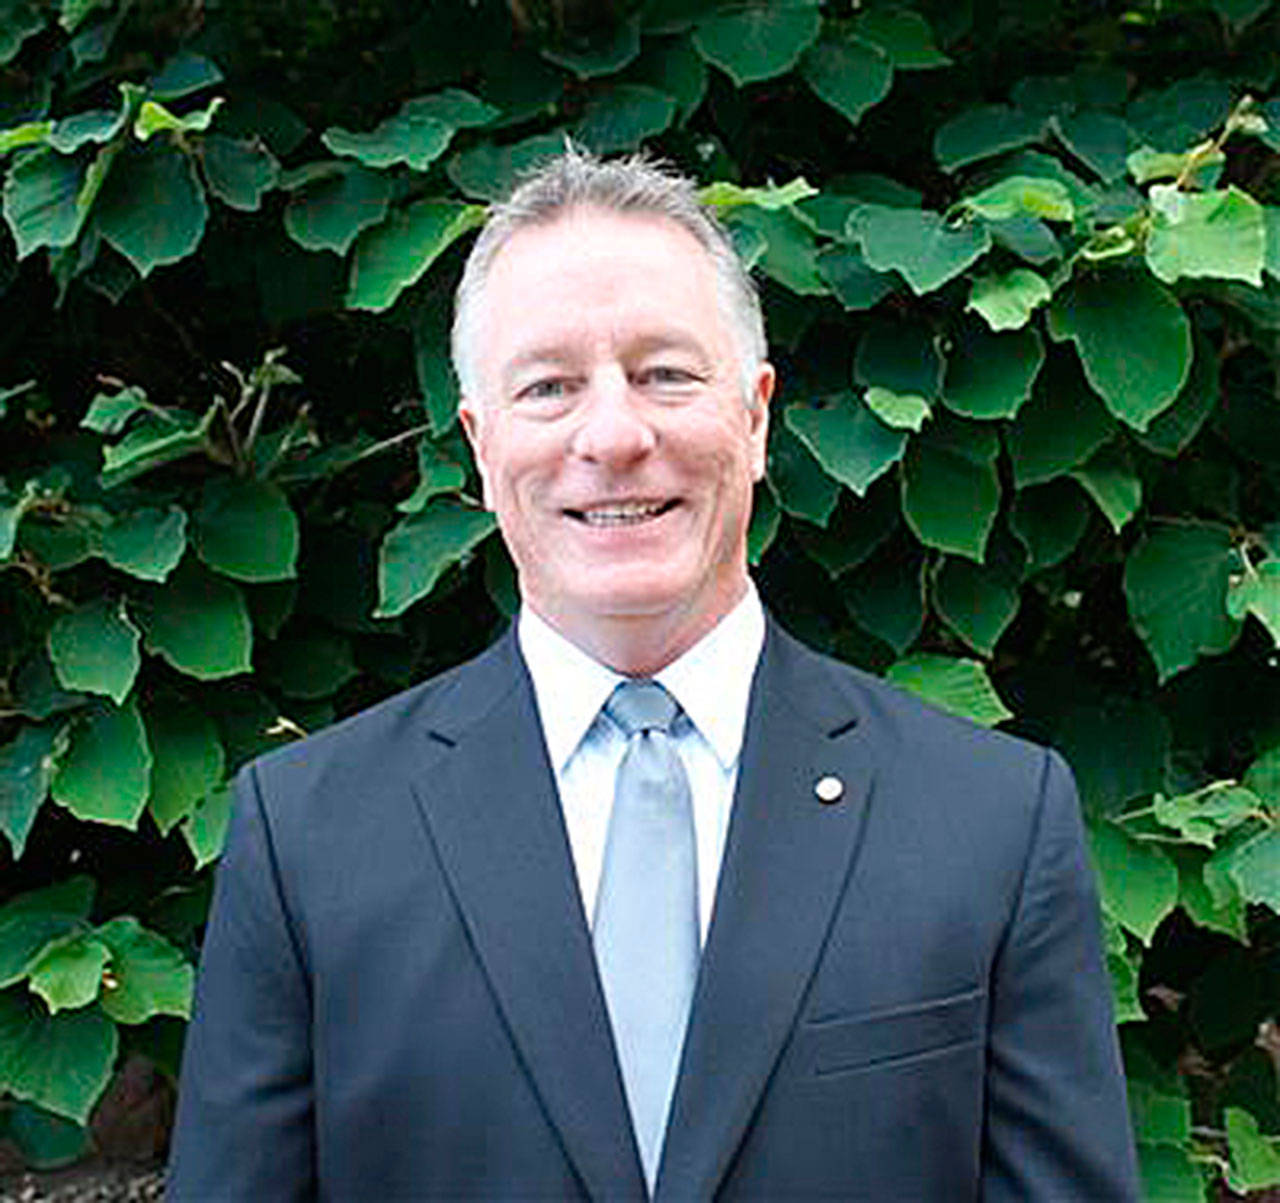 Dr. Robert Manahan joins Snoqualmie Valley School District. Photo courtesy of https://www.svsd410.org/.